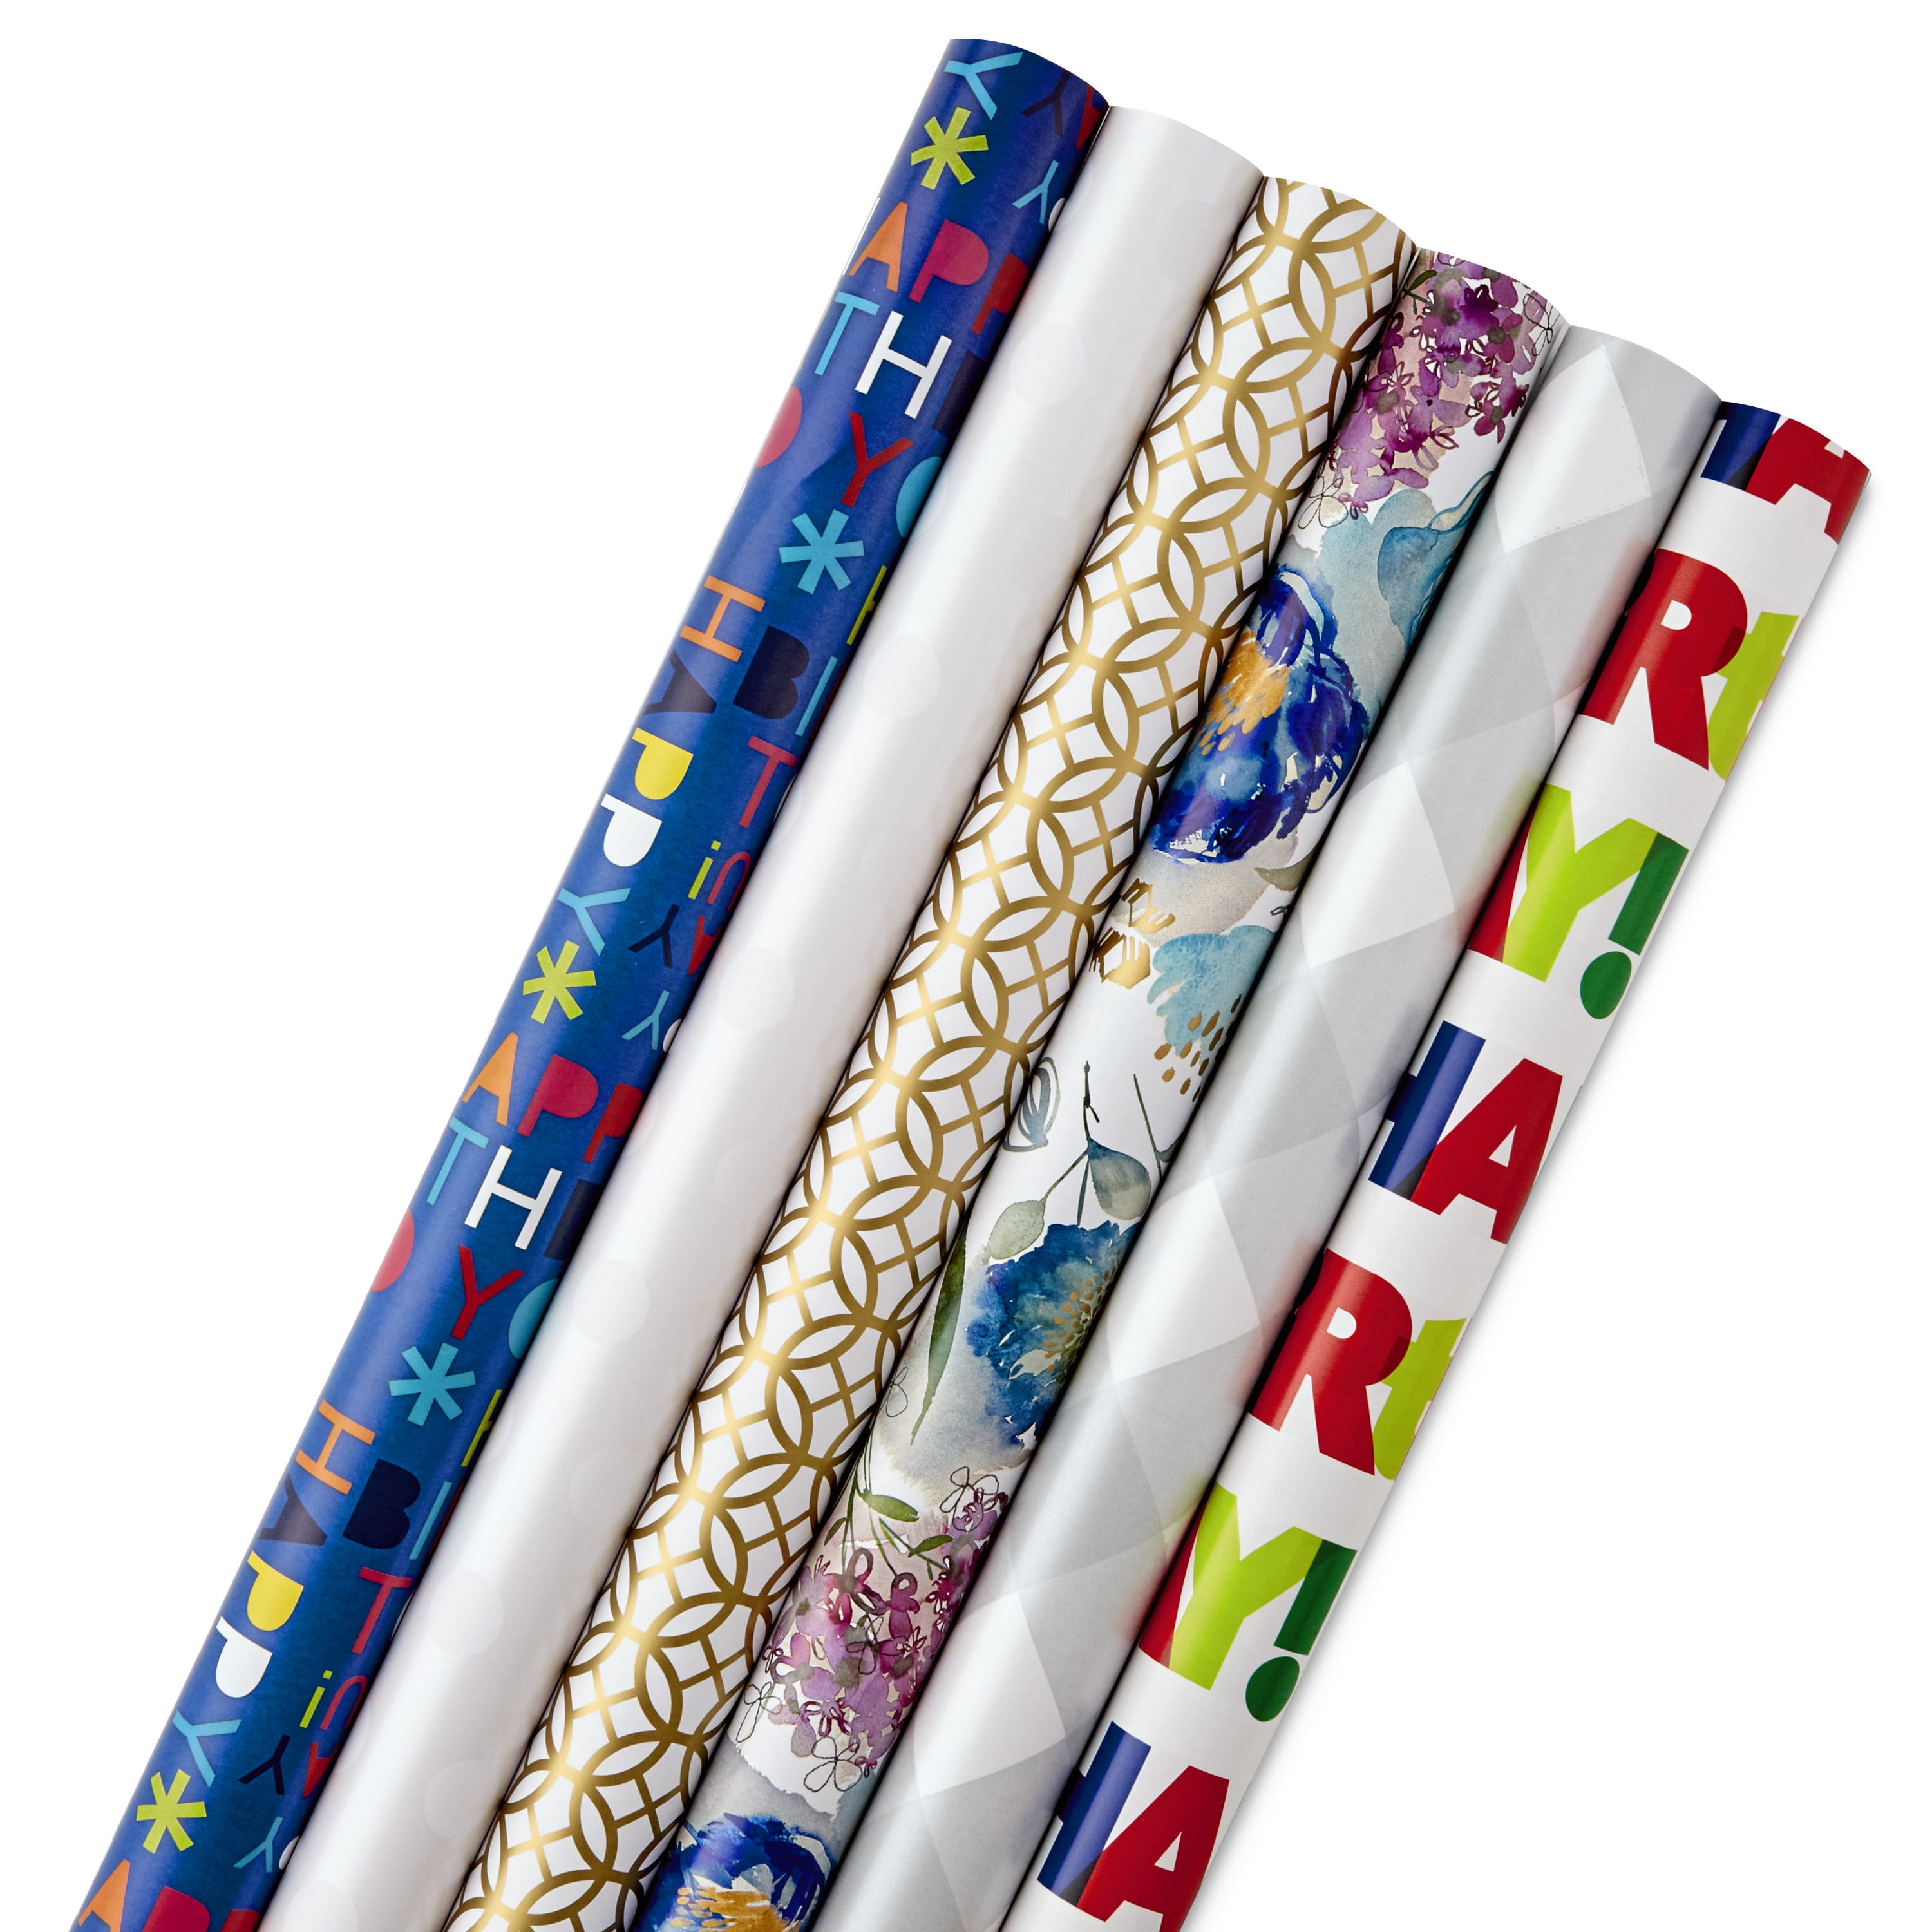  CENTRAL 23 Happy Birthday Wrapping Paper - 6 Sheets of Black  Gift Wrap and Tags - Age 21 - Marble Print - 21st Birthday Wrapping Paper  for Him Her - For